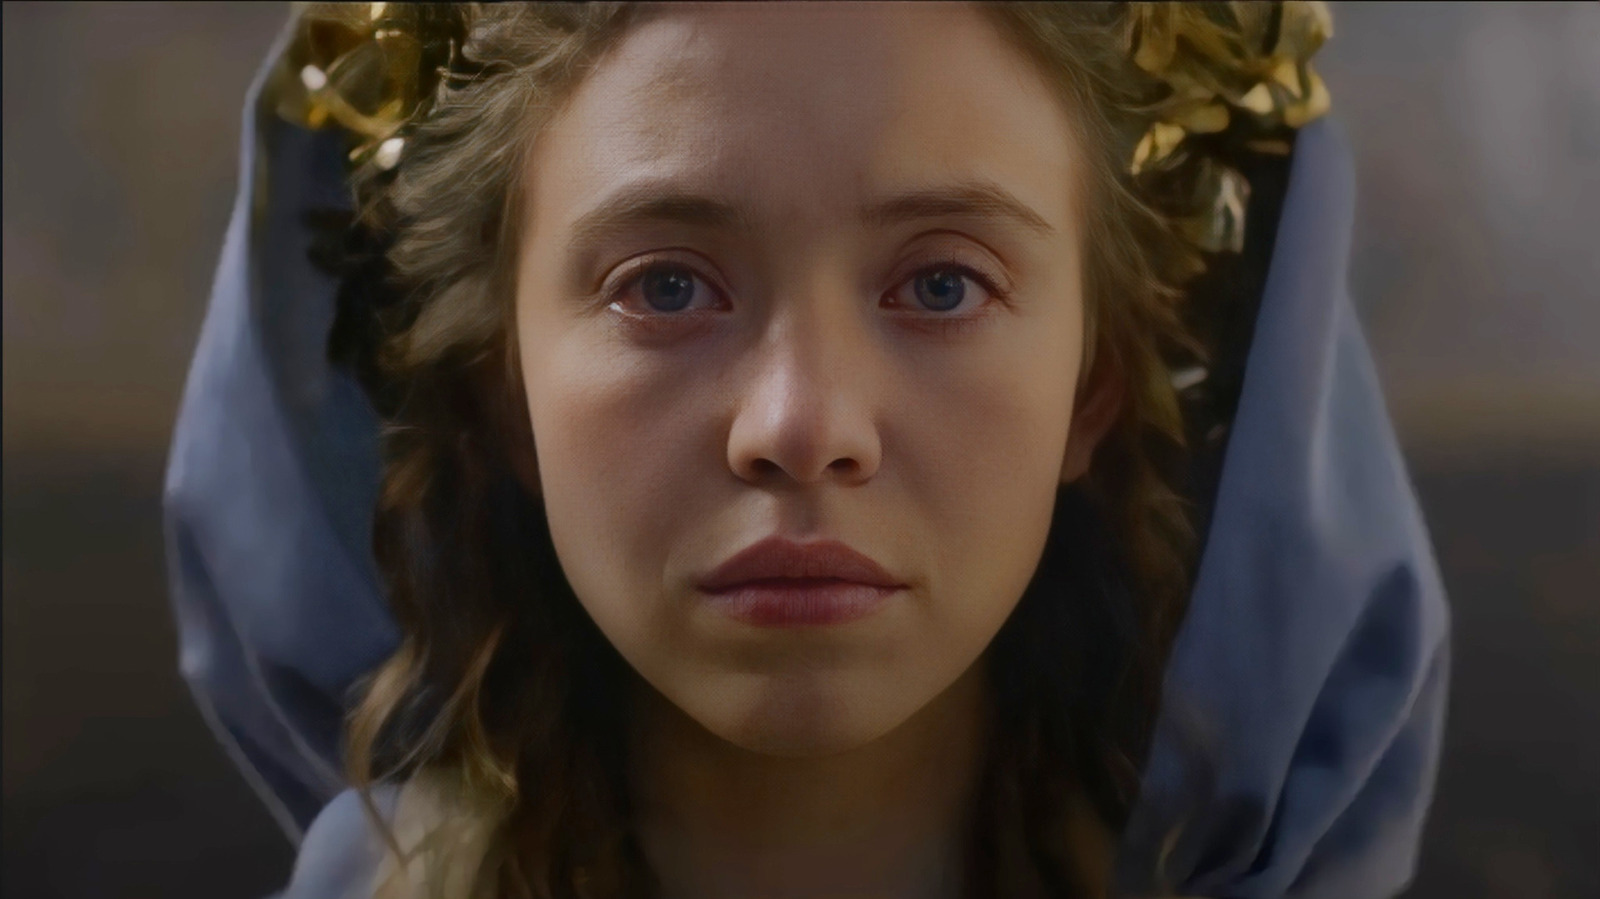 Sydney Sweeney’s Horror Movie Immaculate Continues An Exciting Actor-Director Relationship